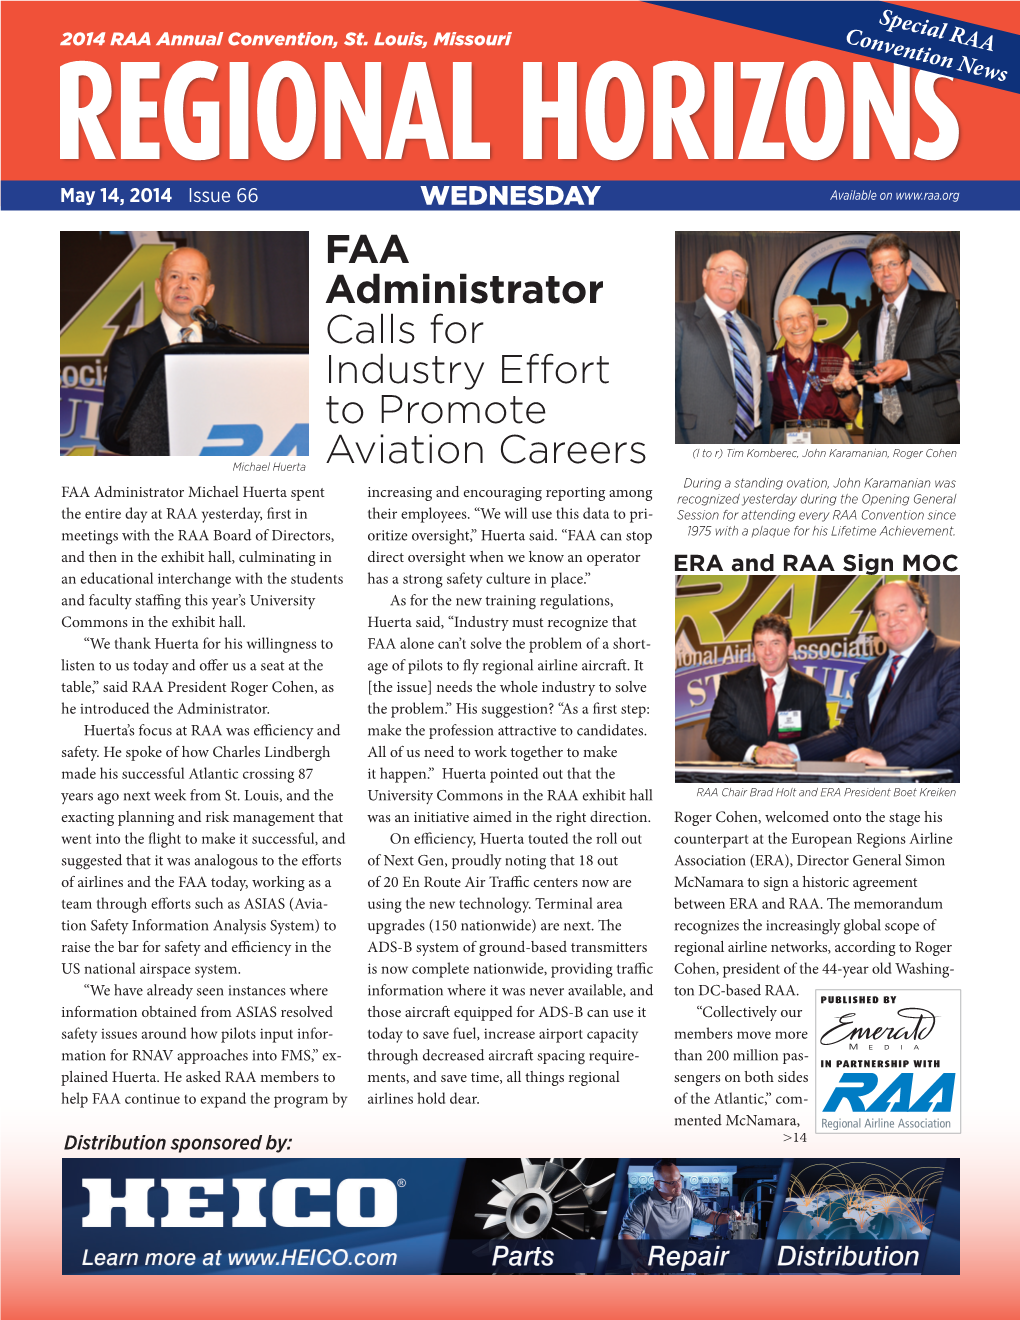 FAA Administrator Calls for Industry Effort to Promote Aviation Careers